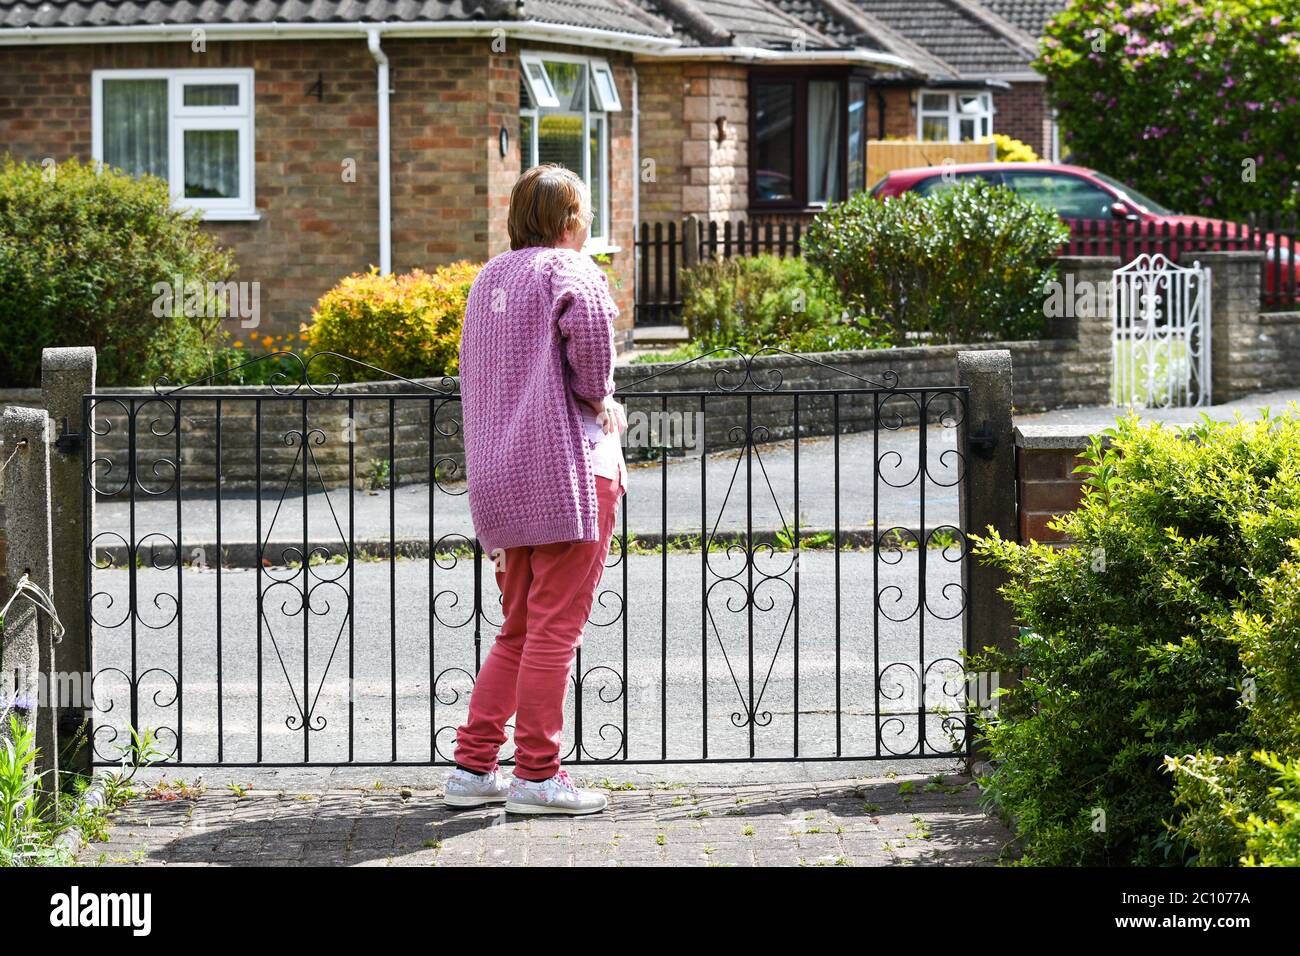 woman standing at her front gate during the covid-19 pandemic Stock Photo